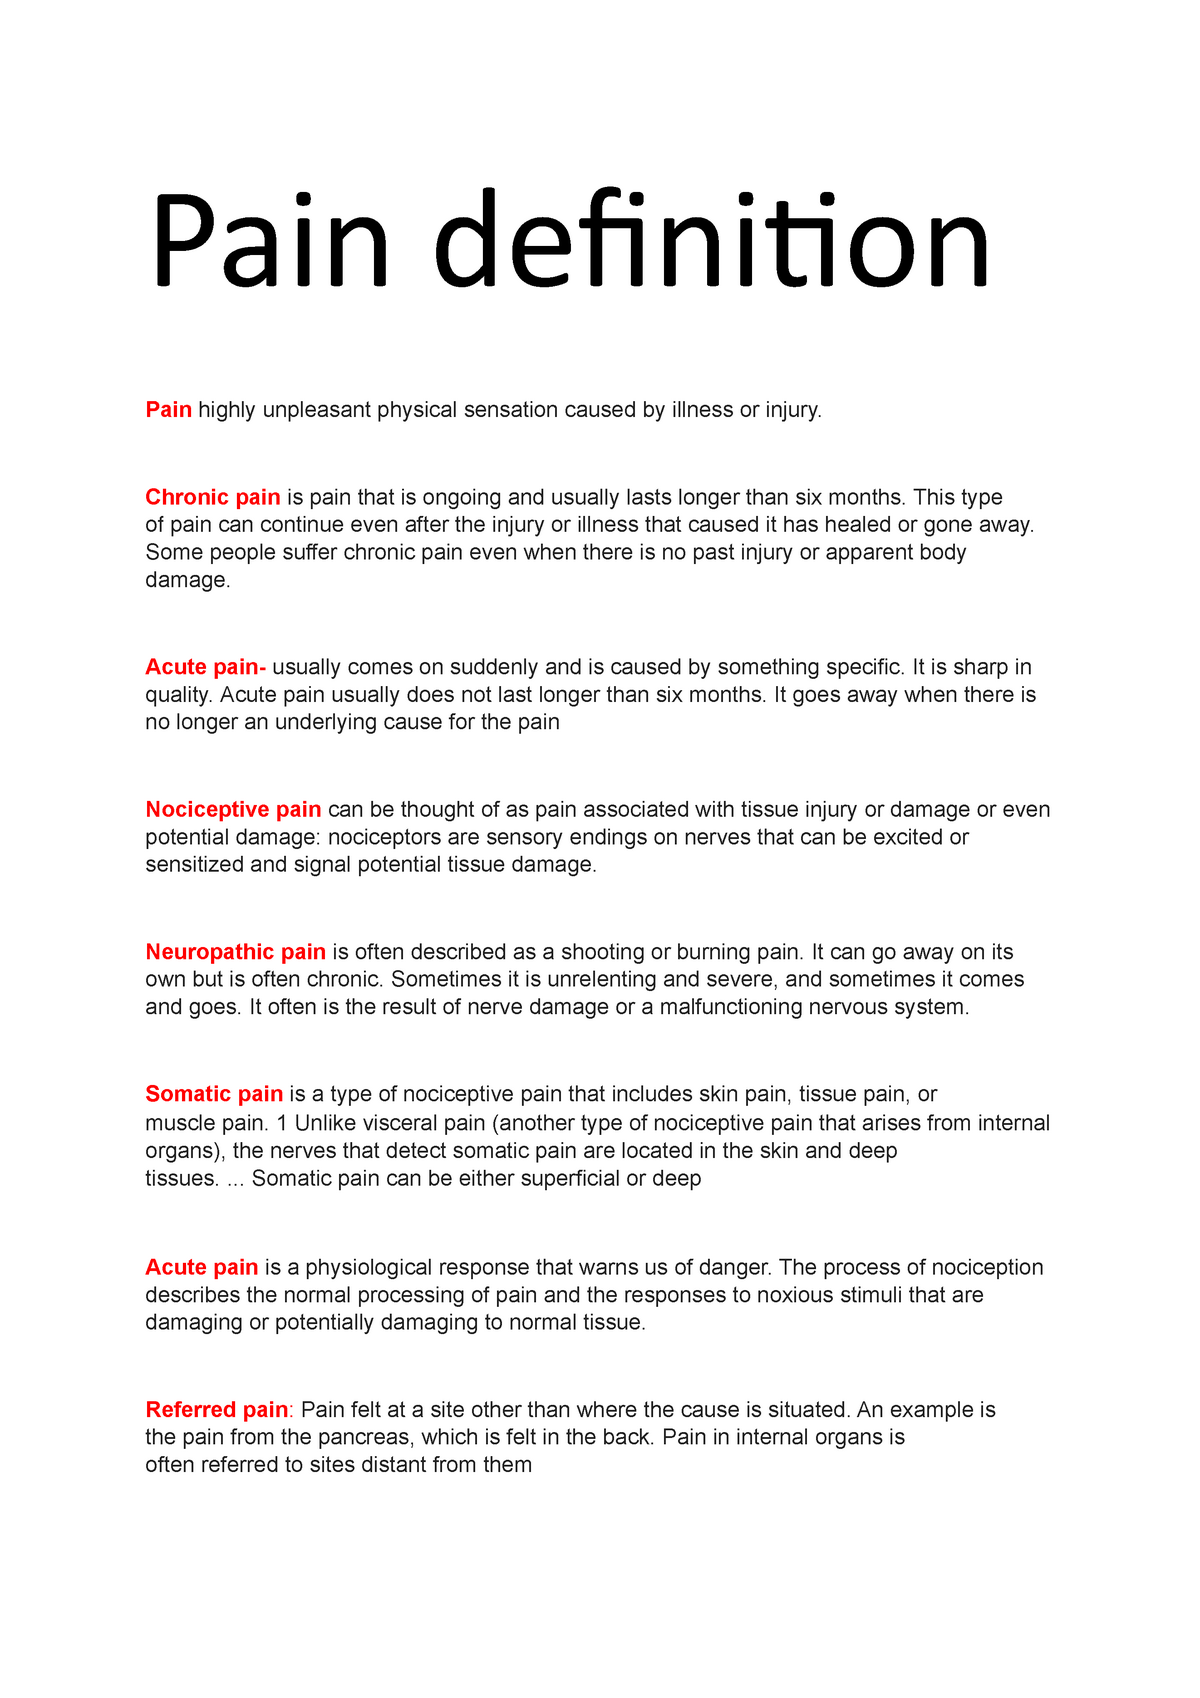 Pain Definitions Pain Definition Pain Highly Unpleasant Physical